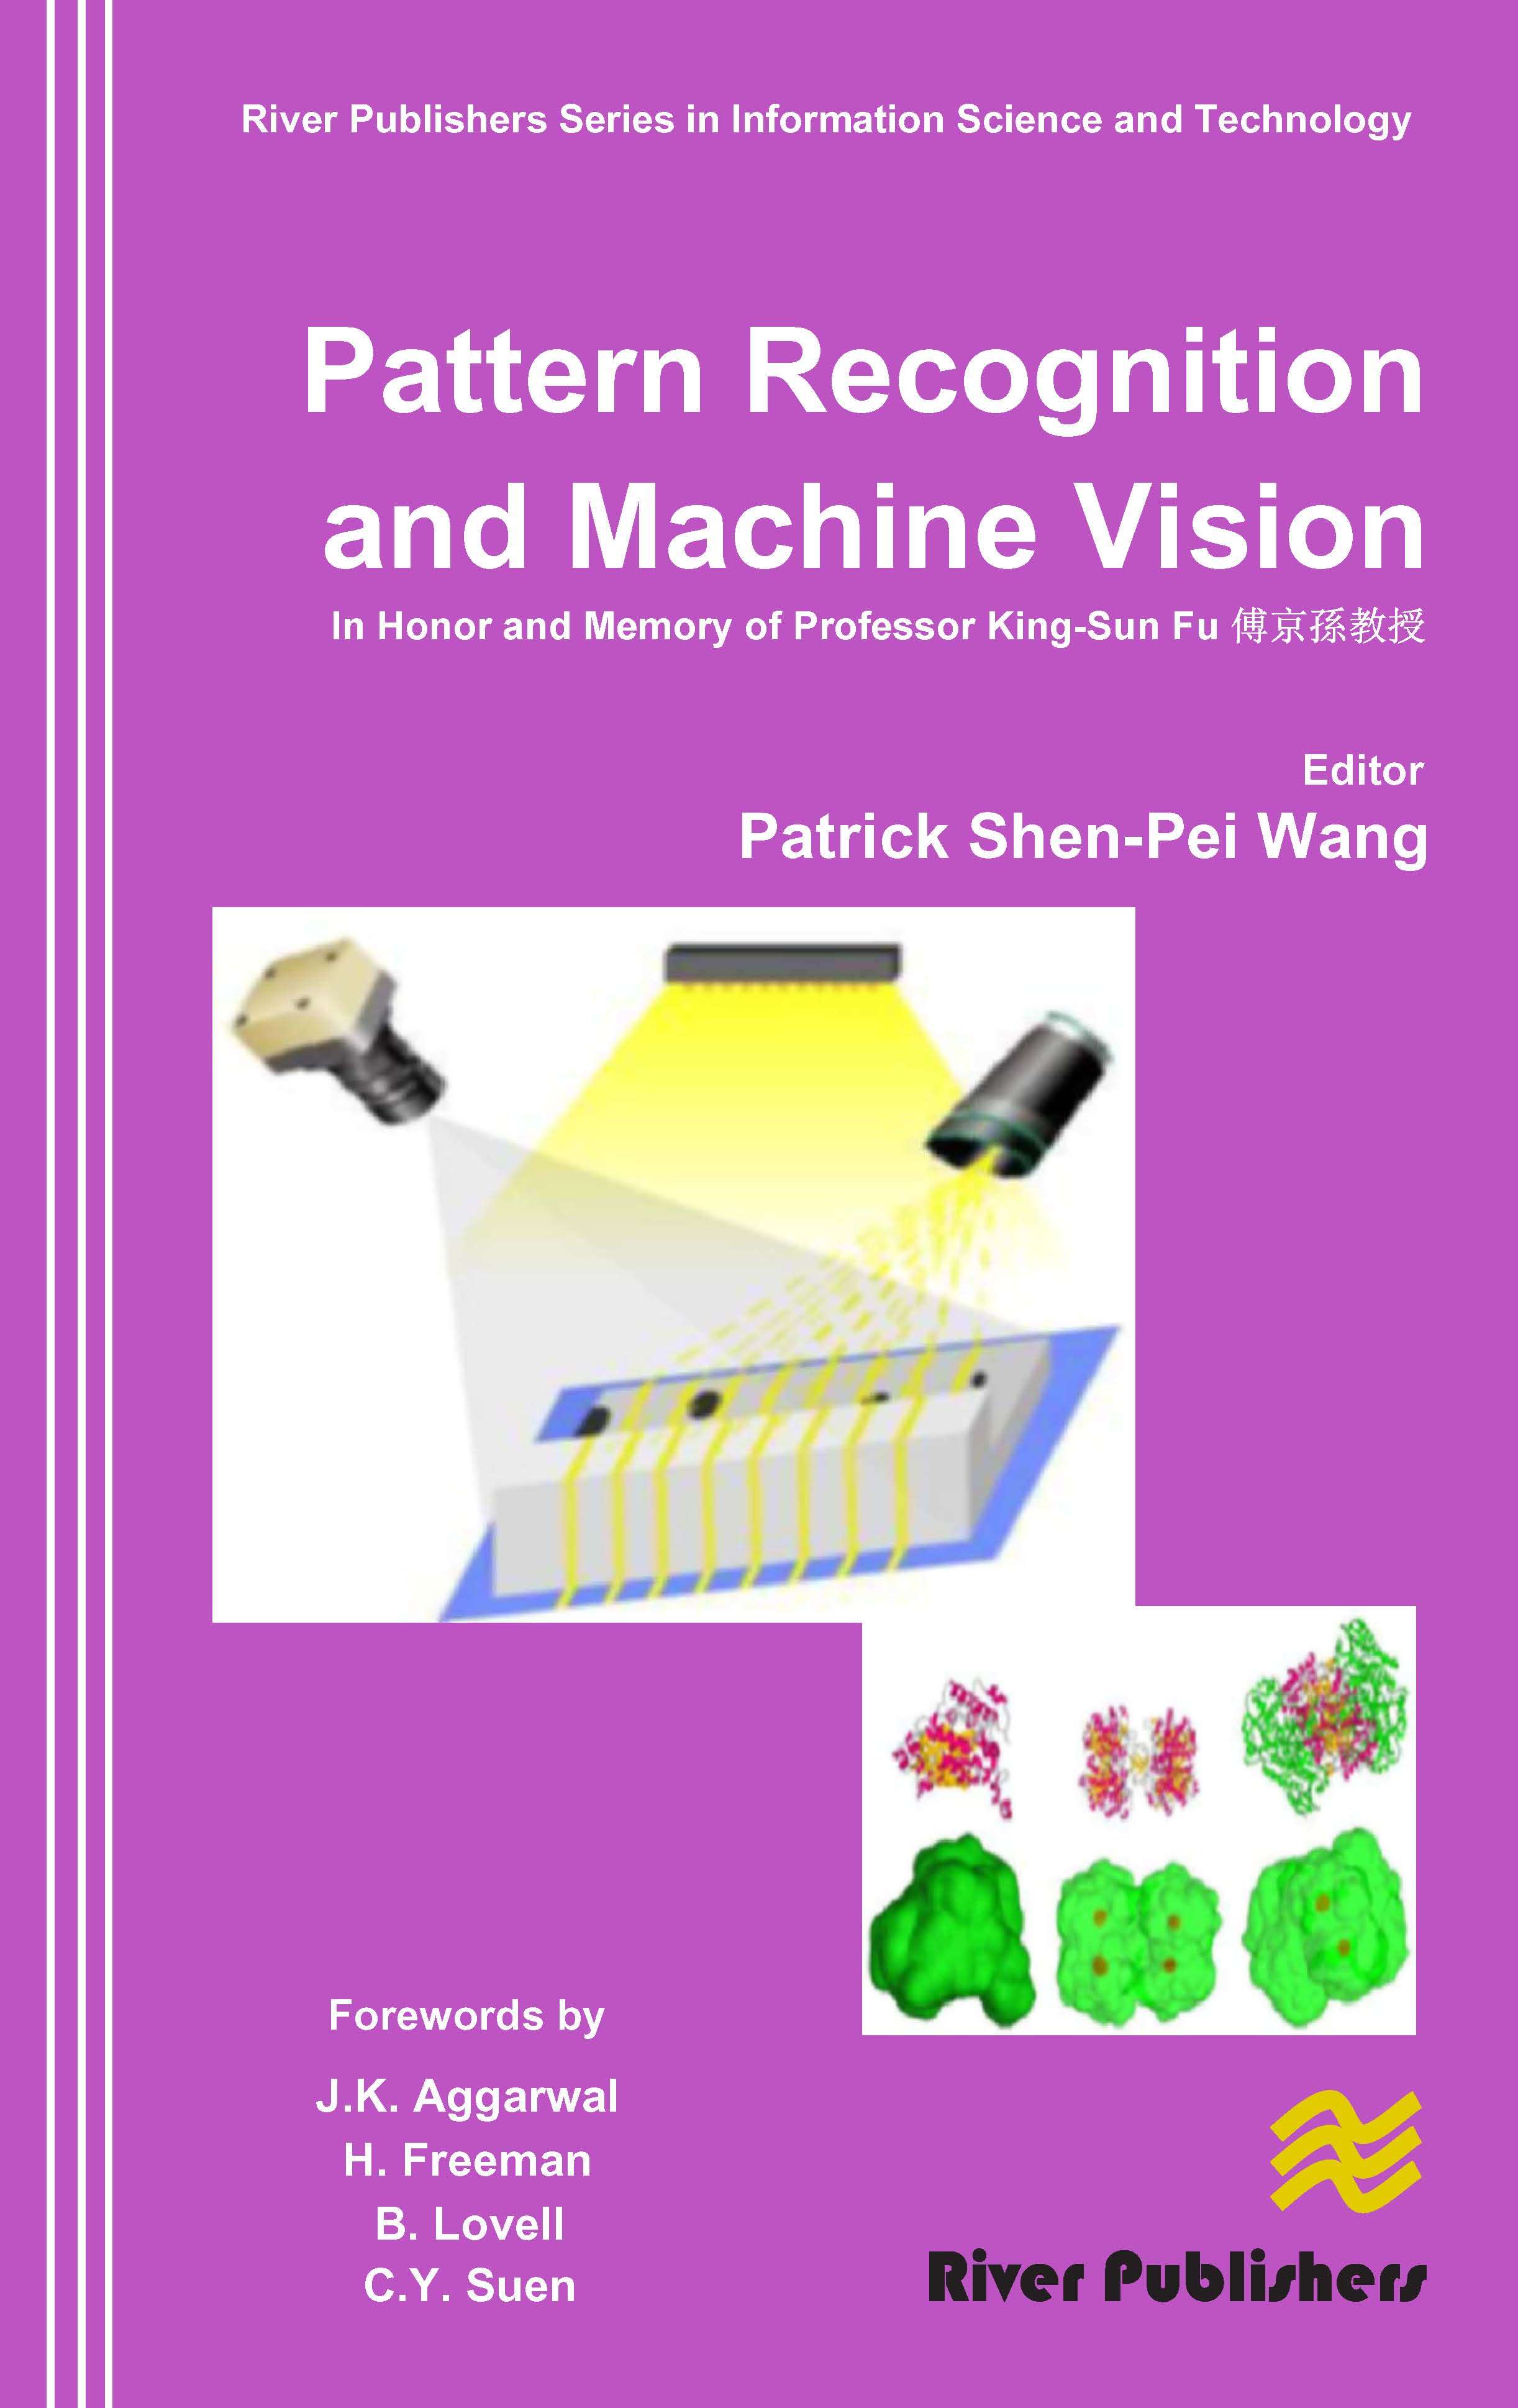 Pattern Recognition and Machine Vision   -in Honor and Memory of Late Prof. King-Sun Fu